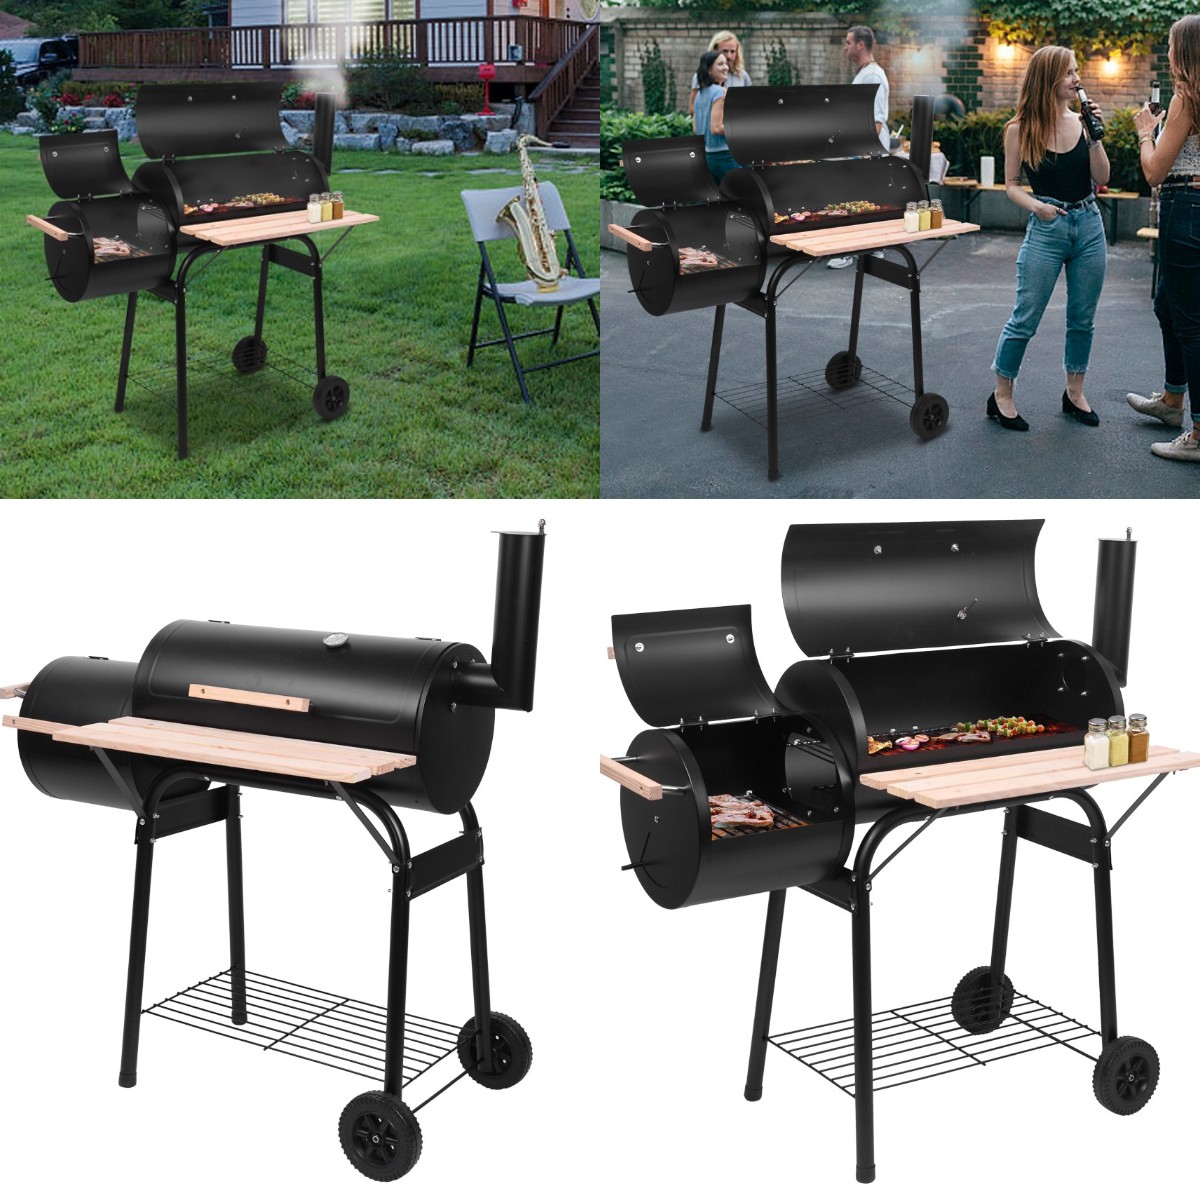 [US IN STOCK] Goorabbit Charcoal Grill,Outdoor Cooking Grill,Charcoal Grill,Outdoor Cooking Grill,Portable Steel Charcoal BBQ Grill and Offset 24.4" L x 29.6" H Smoker Outdoor for Camping,Black - image 1 of 10